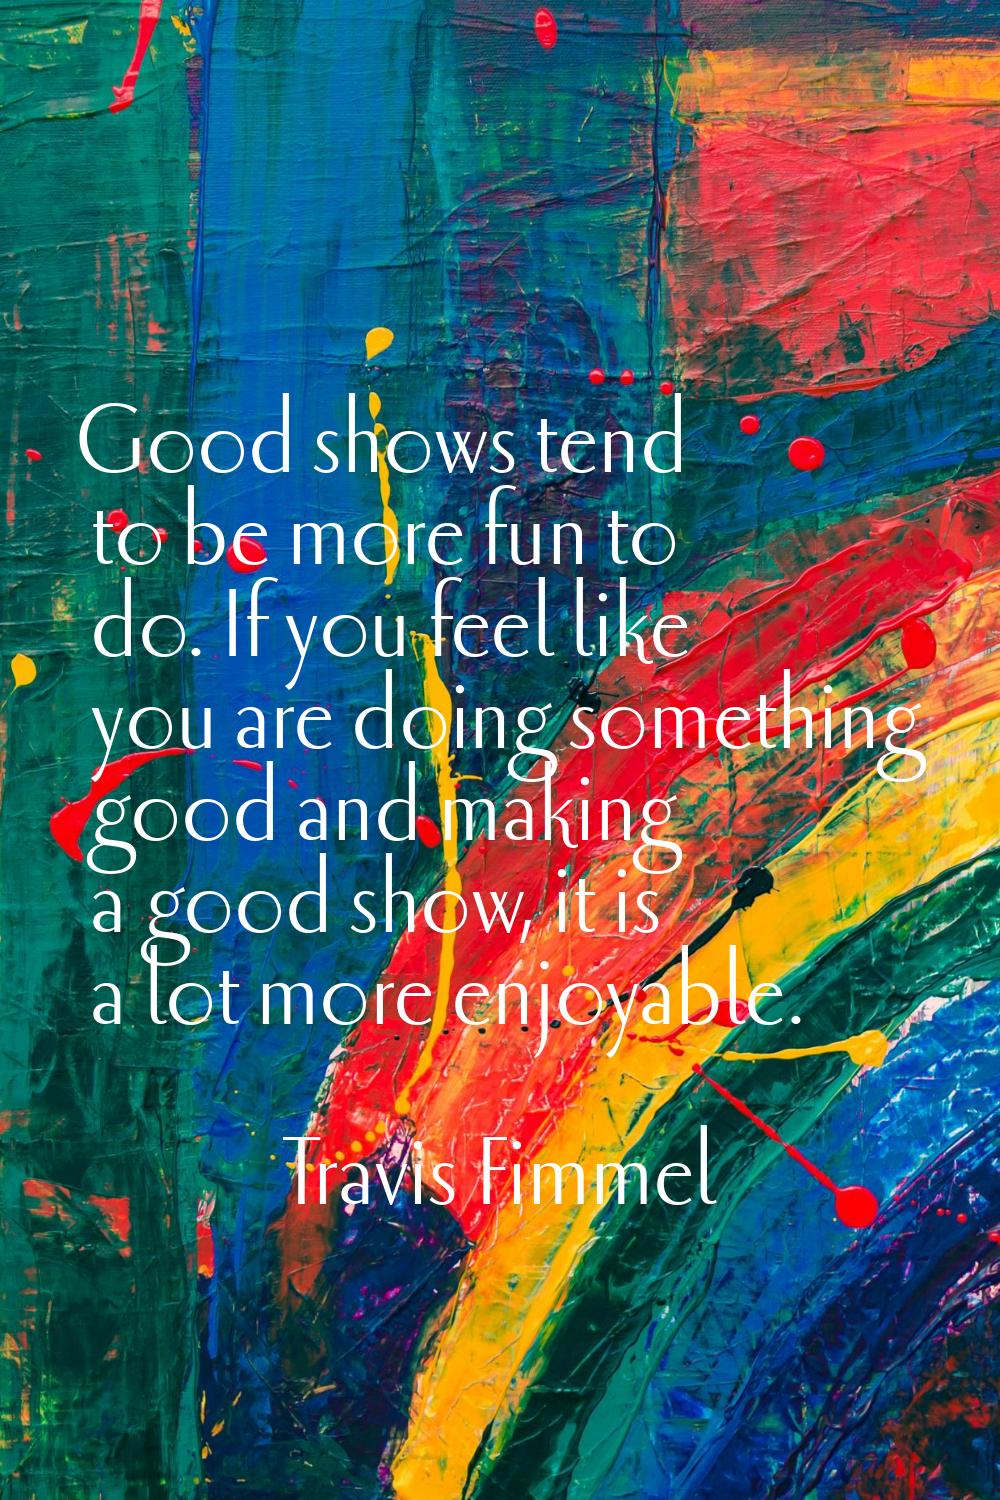 Good shows tend to be more fun to do. If you feel like you are doing something good and making a go